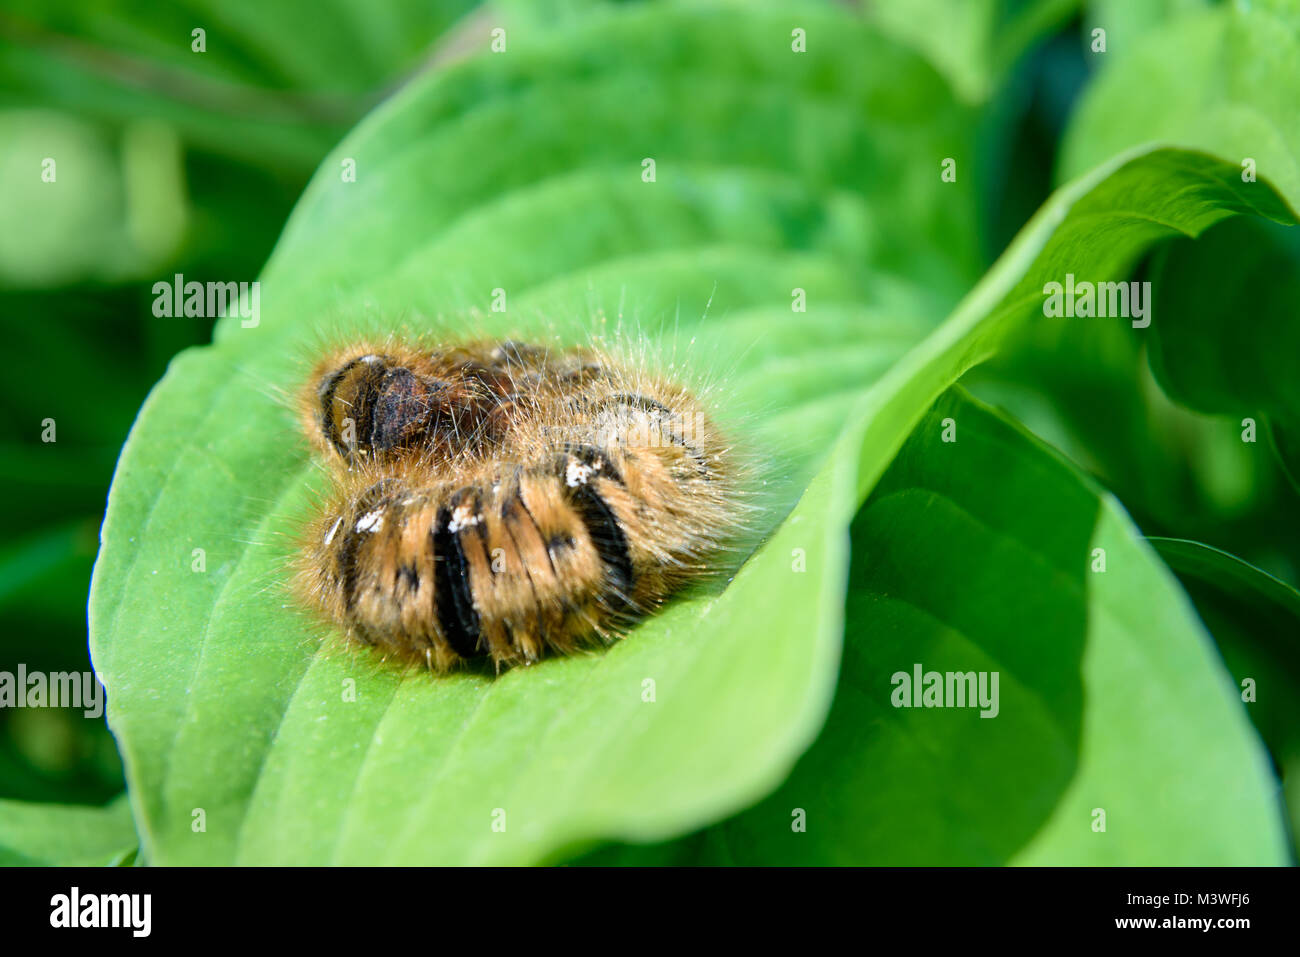 Hairy brown large caterpillar Oak egga, Lasiocampa quercus on green leaf in nature Stock Photo